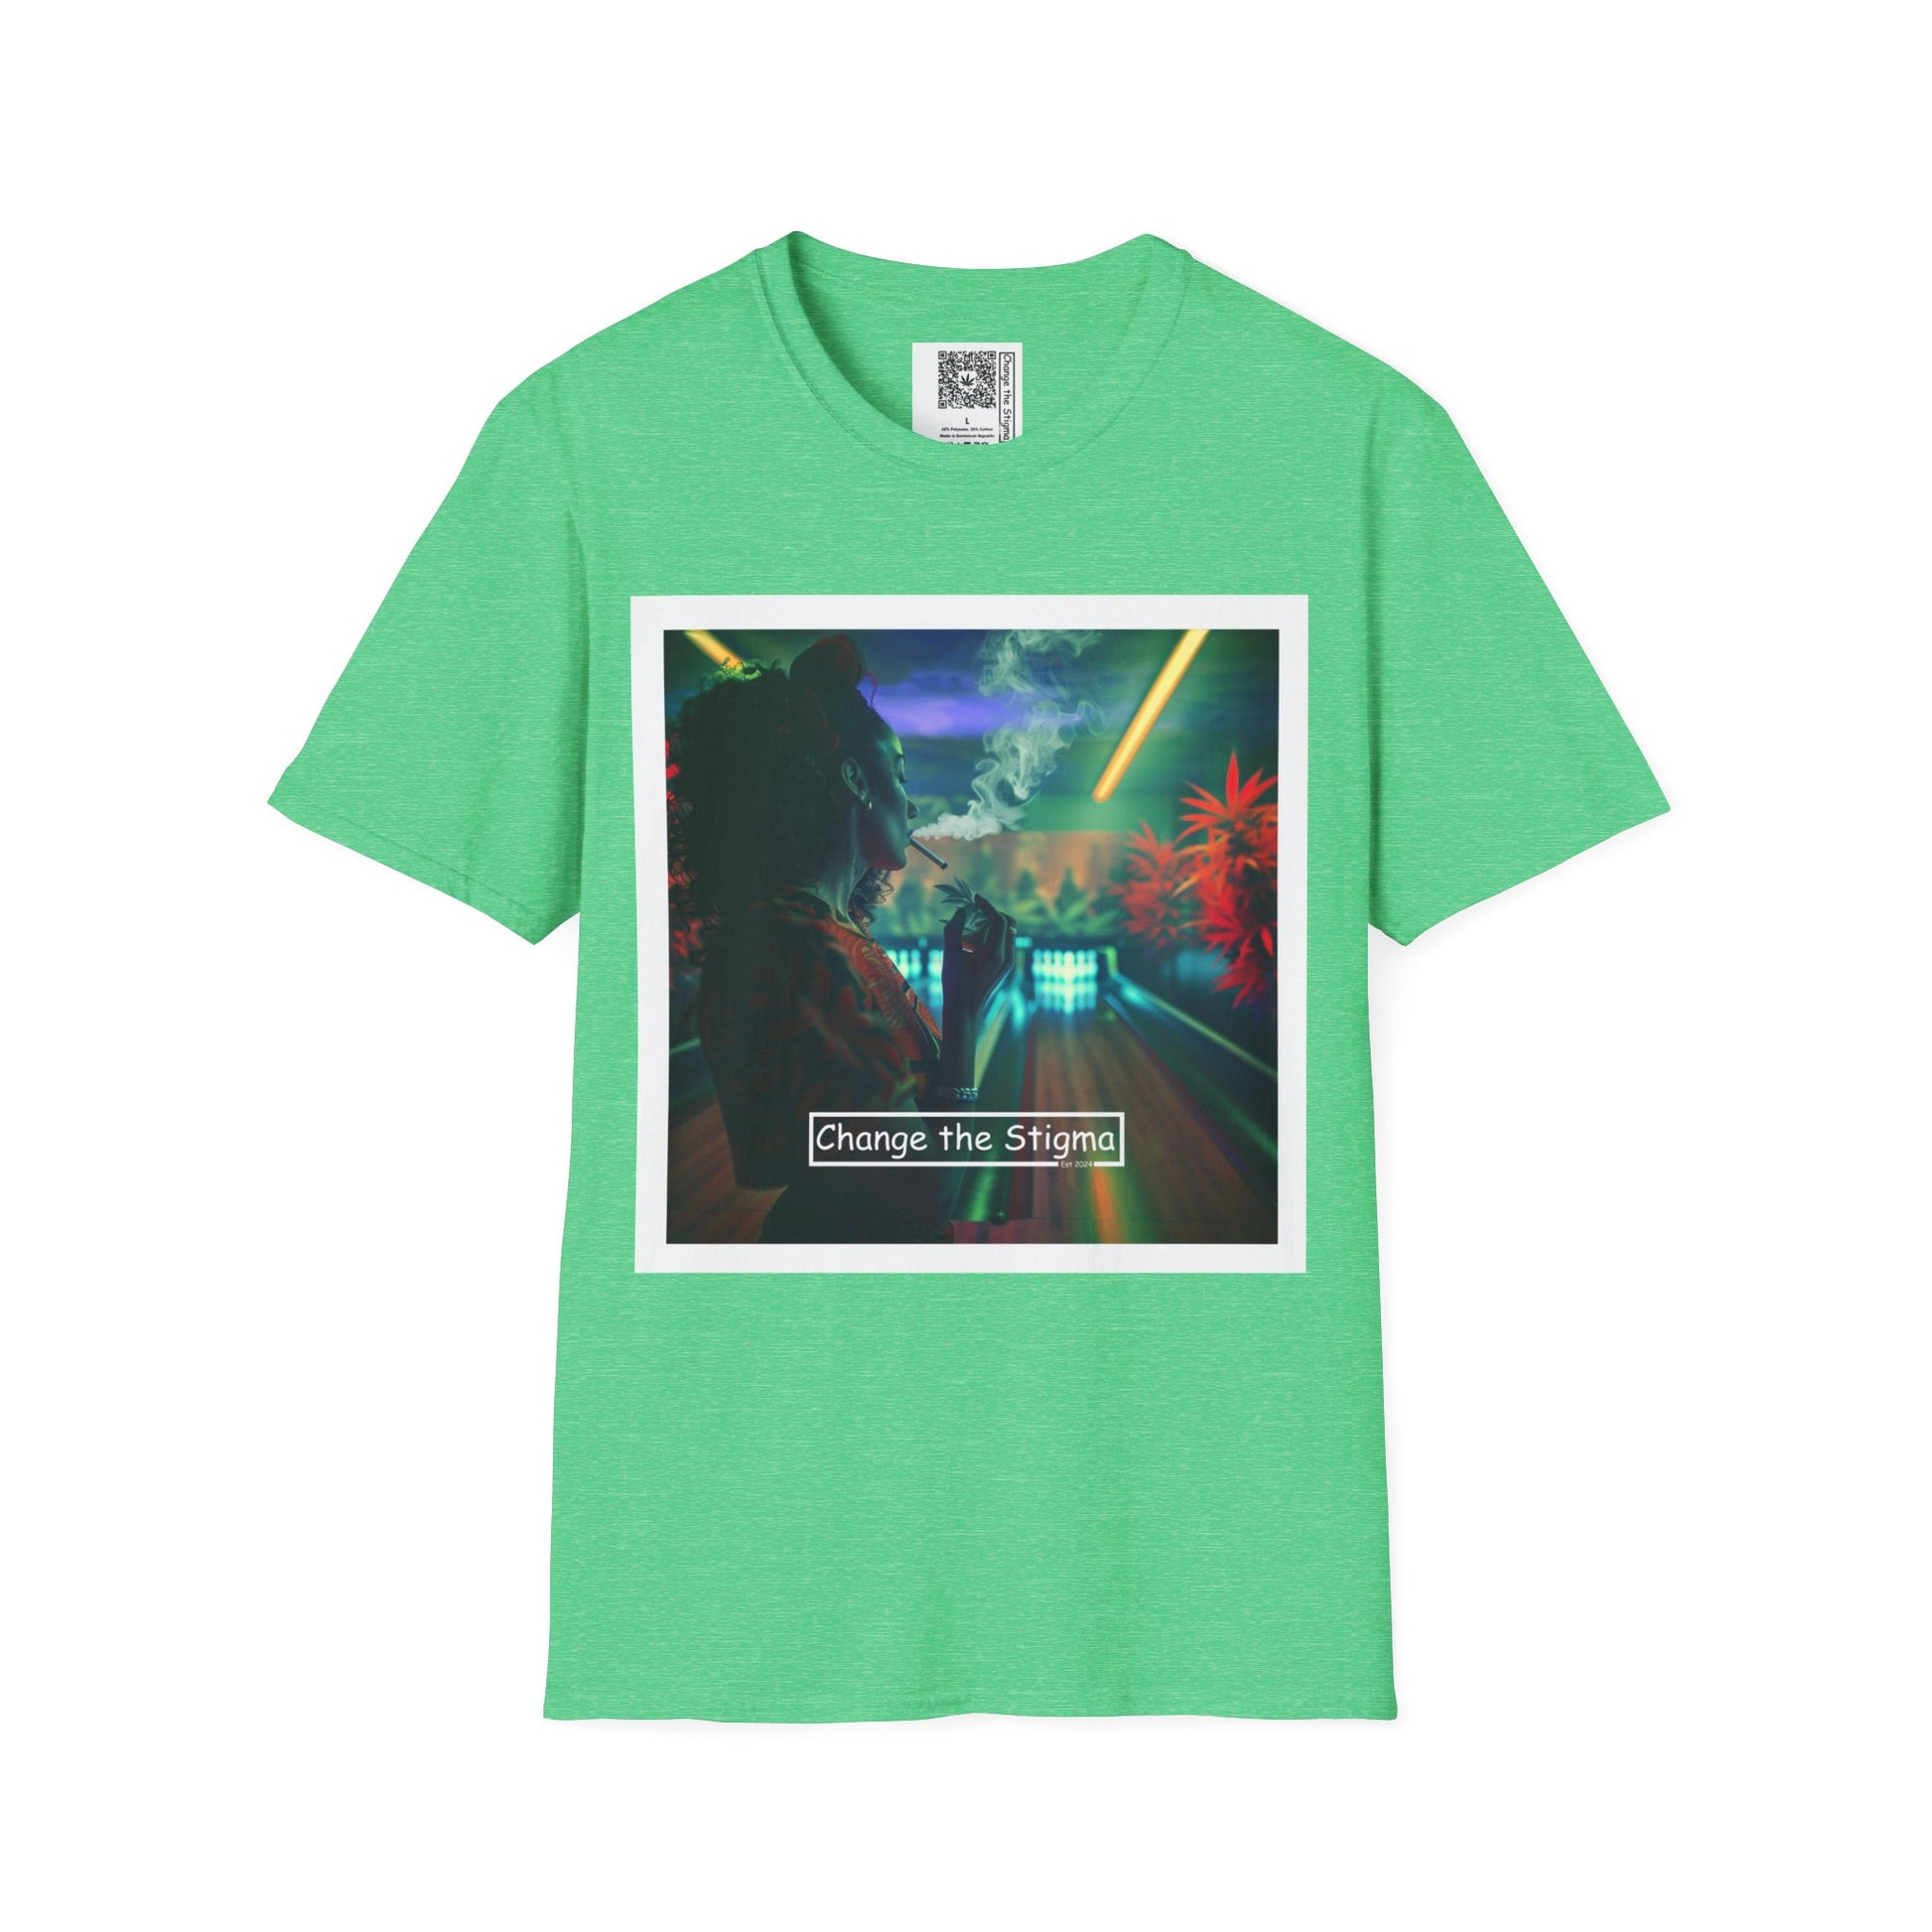 Change the Stigma, Heather Irish Green color, shirt featuring a woman smoking cannabis while bowling, shirt is open displayed